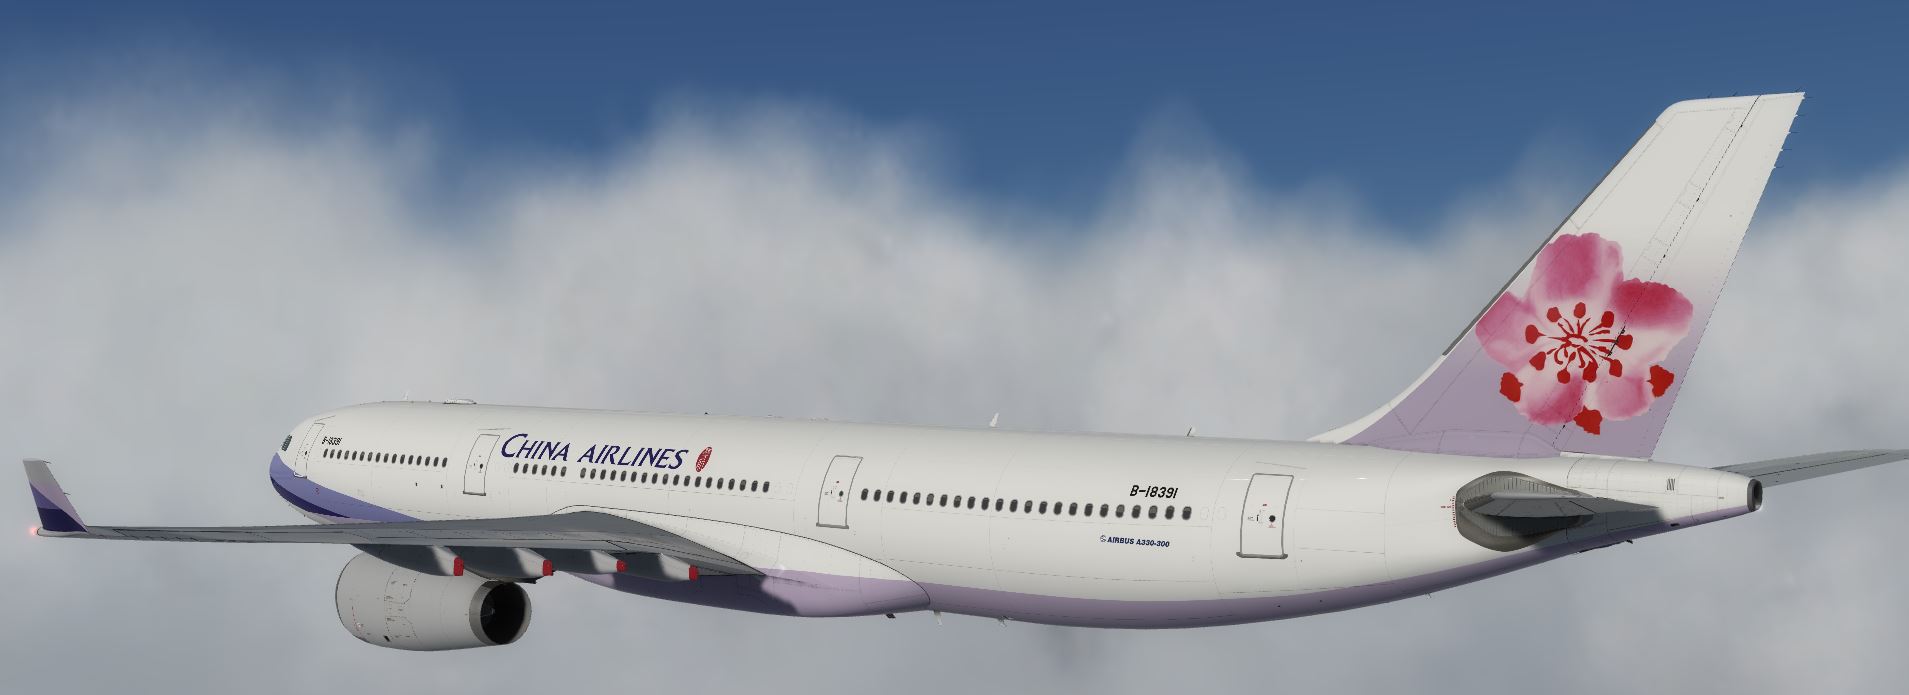 AS A330 ChinaAirline-4671 